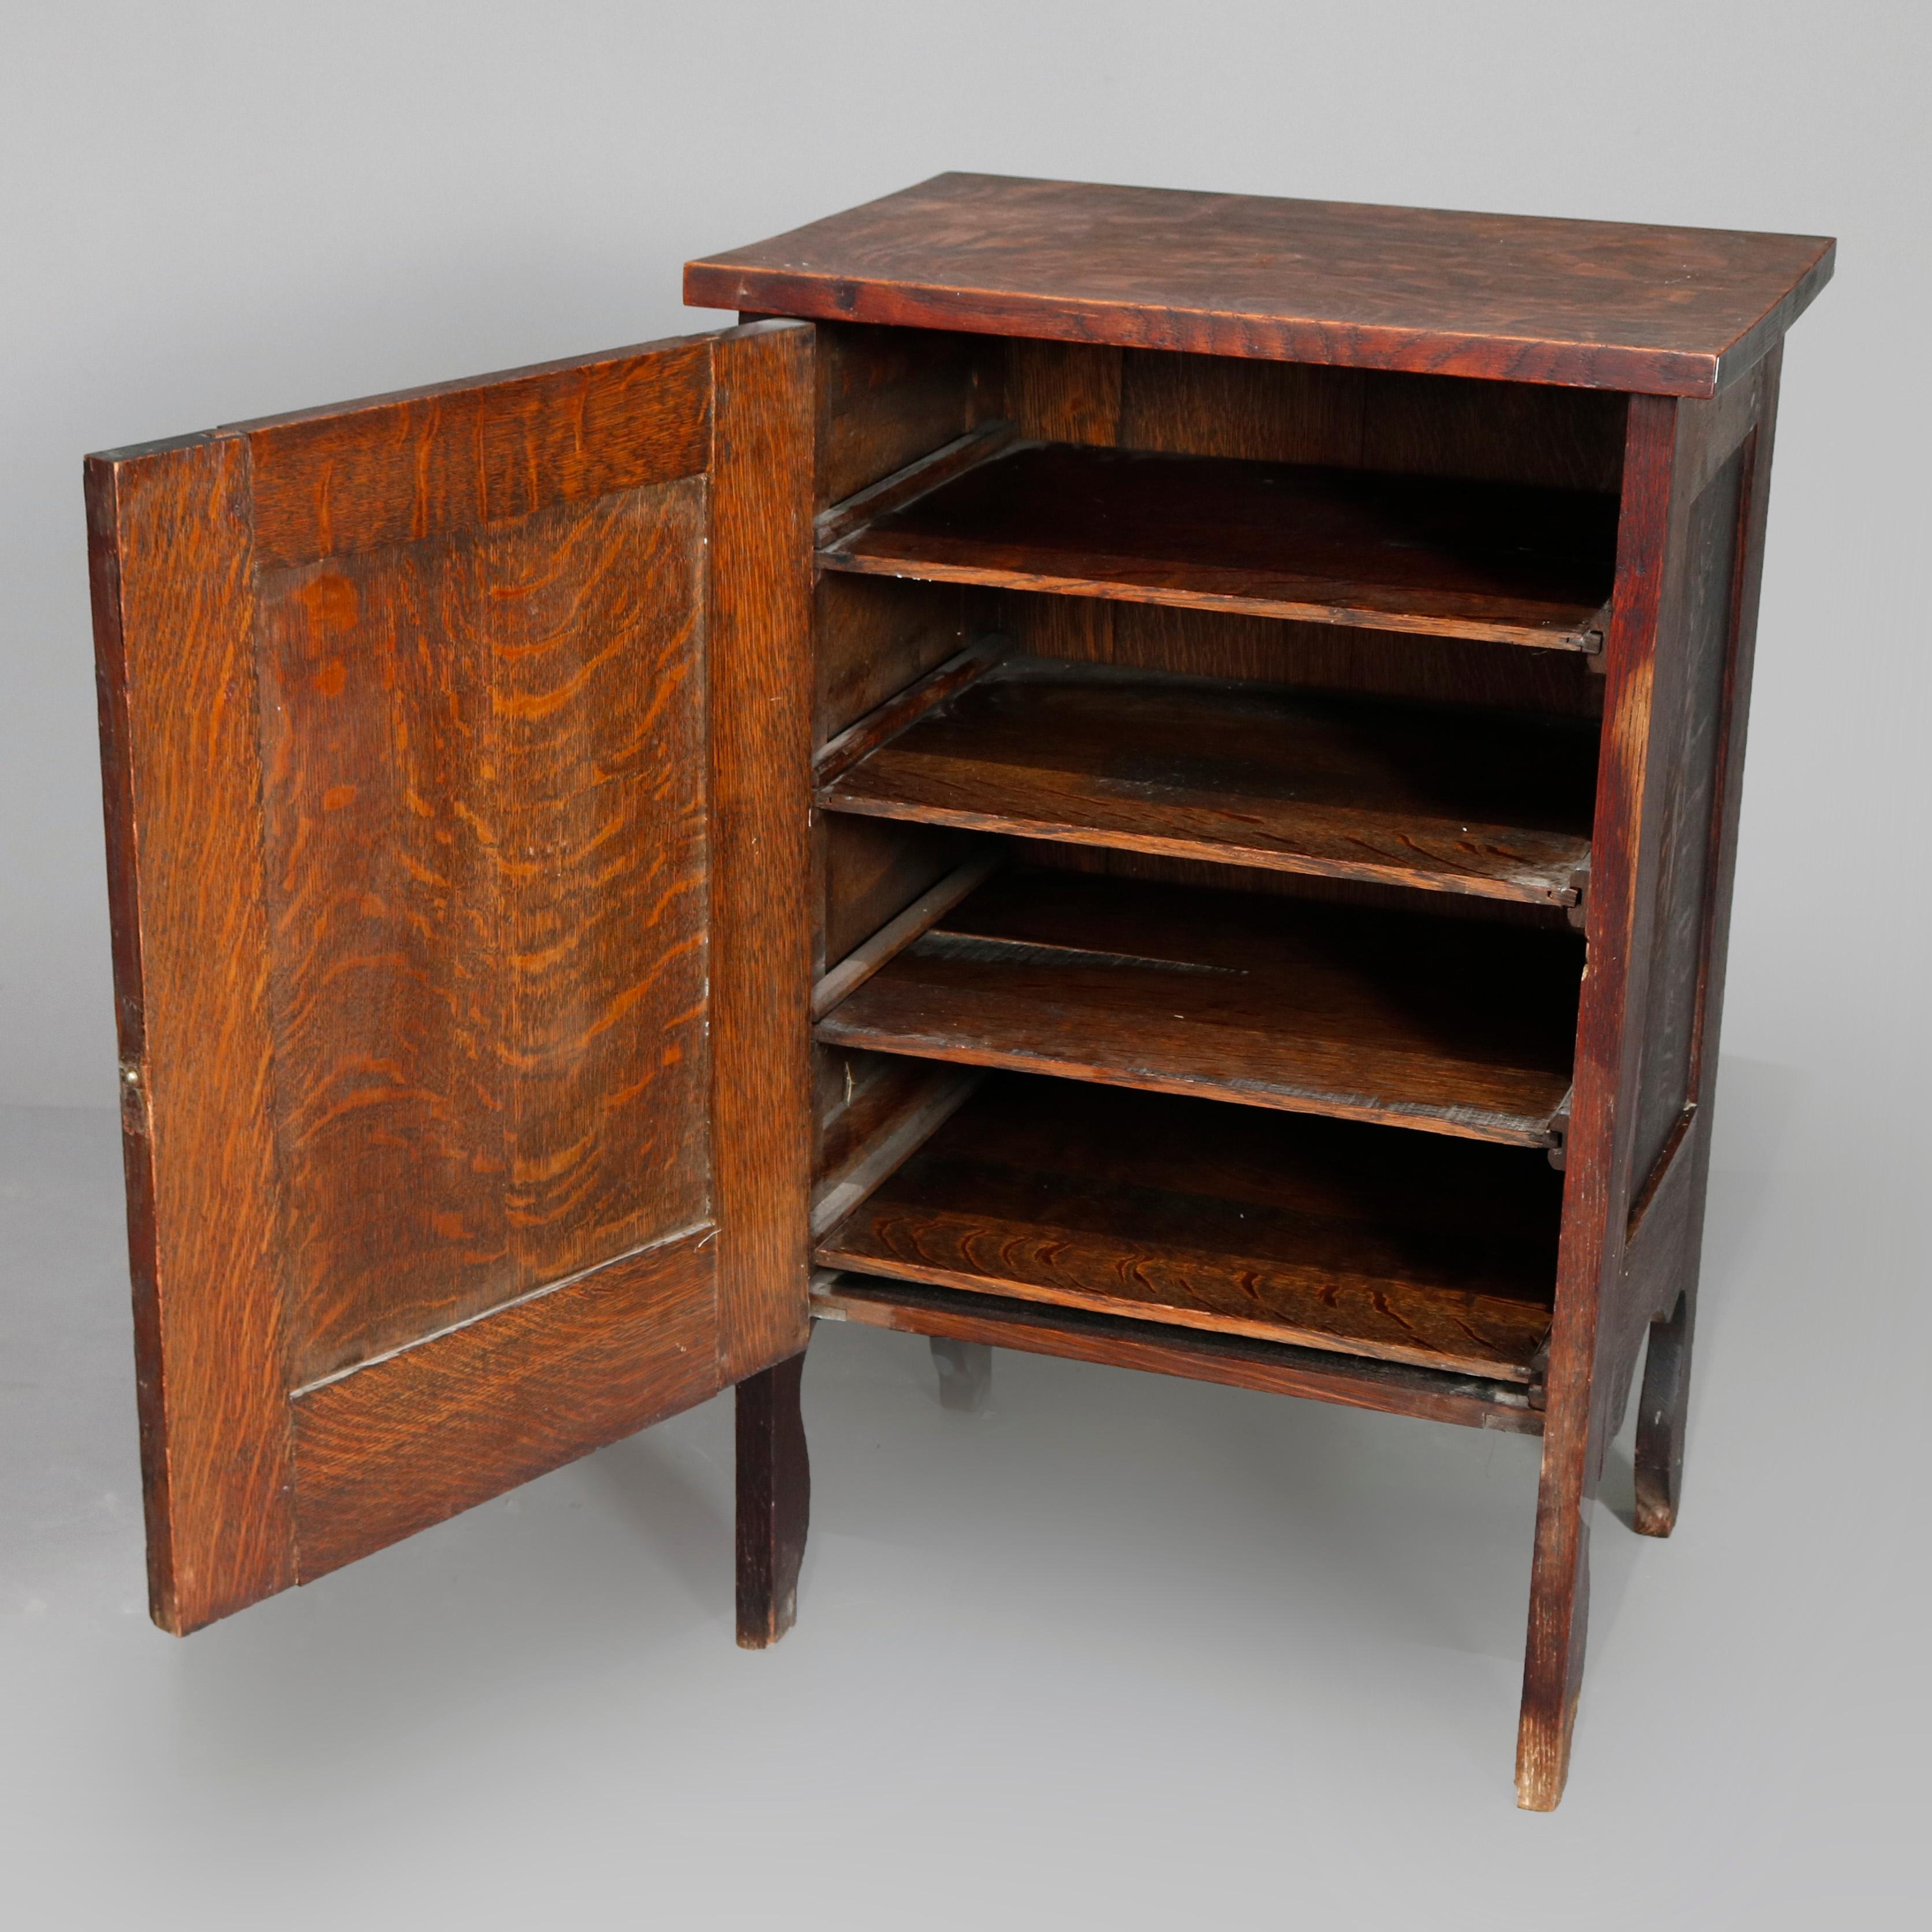 An Arts & Crafts mission oak music cabinet offers paneled quarter sawn oak construction with single door opening to shelved interior, raised on straight shaped legs, circa 1910.

Measures: 32.25